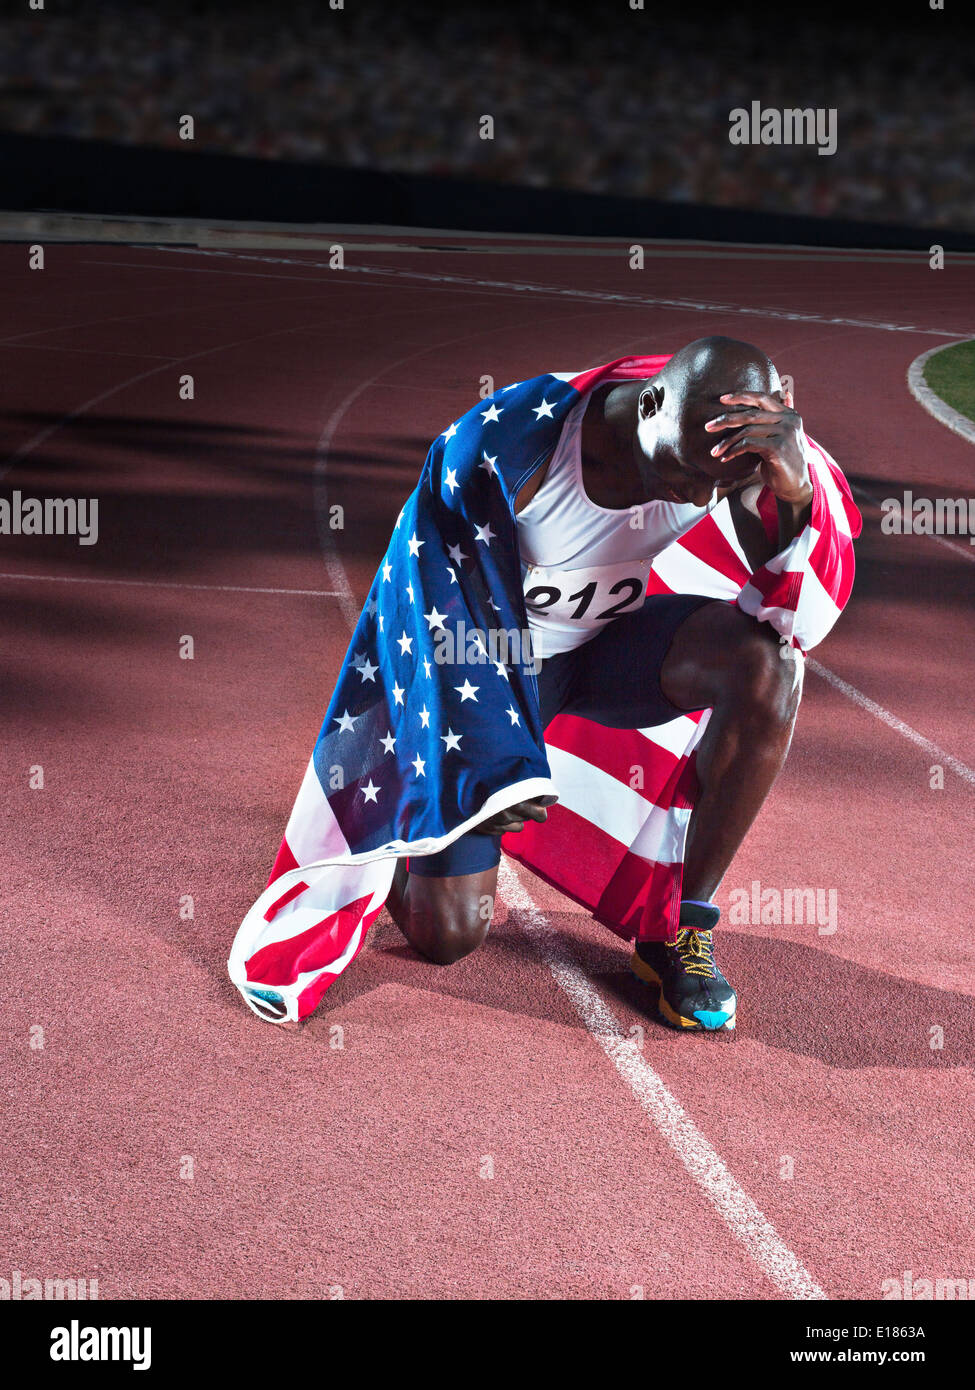 Track and field athlete wrapped in American flag on track Stock Photo